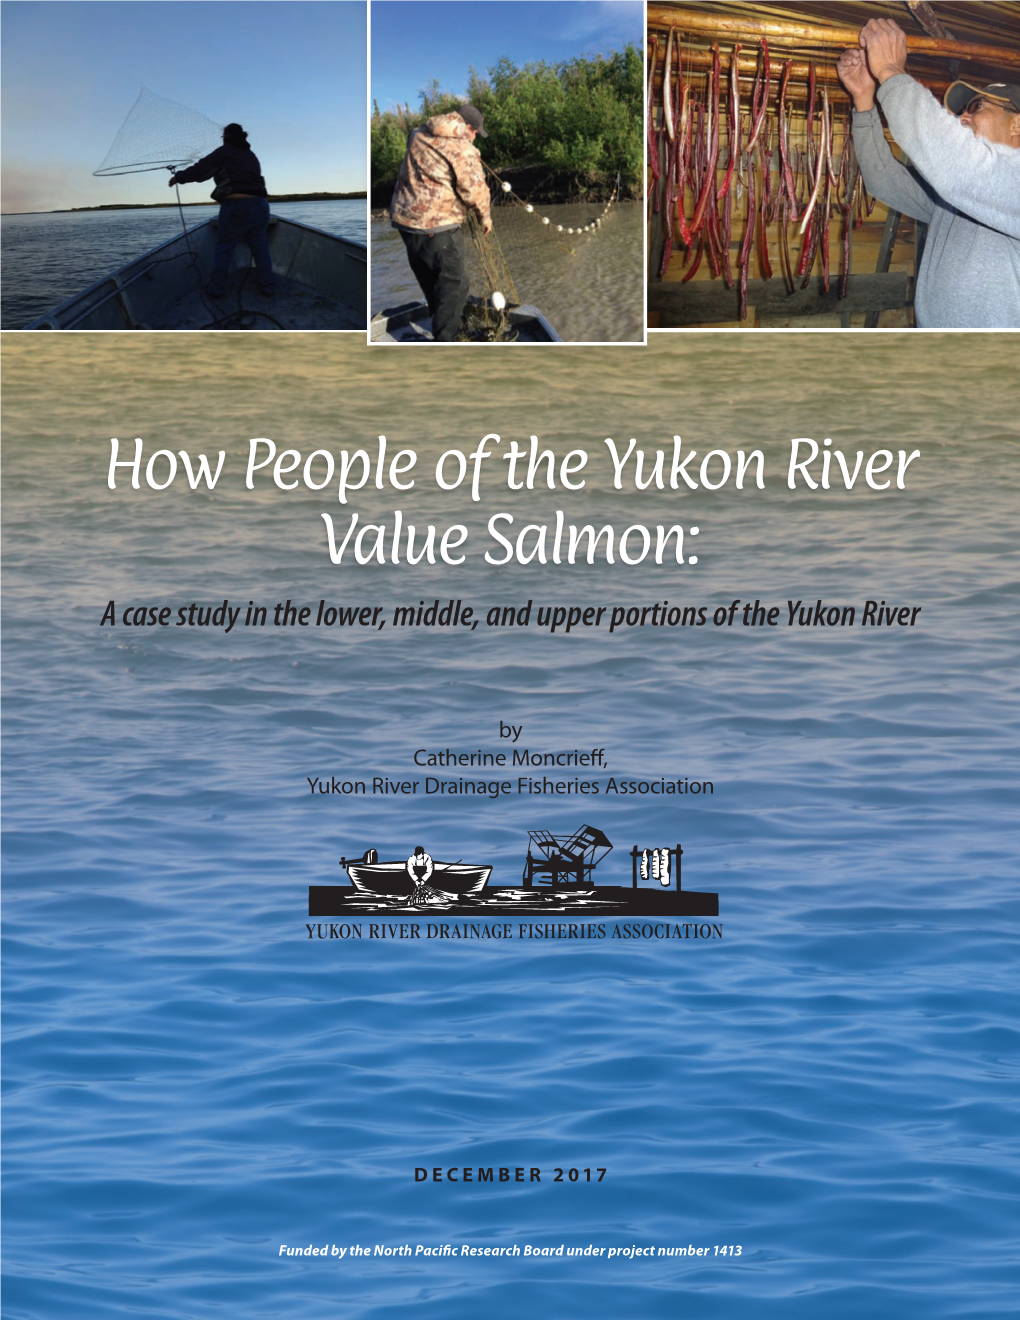 How People of the Yukon River Value Salmon: a Case Study in the Lower, Middle, and Upper Portions of the Yukon River